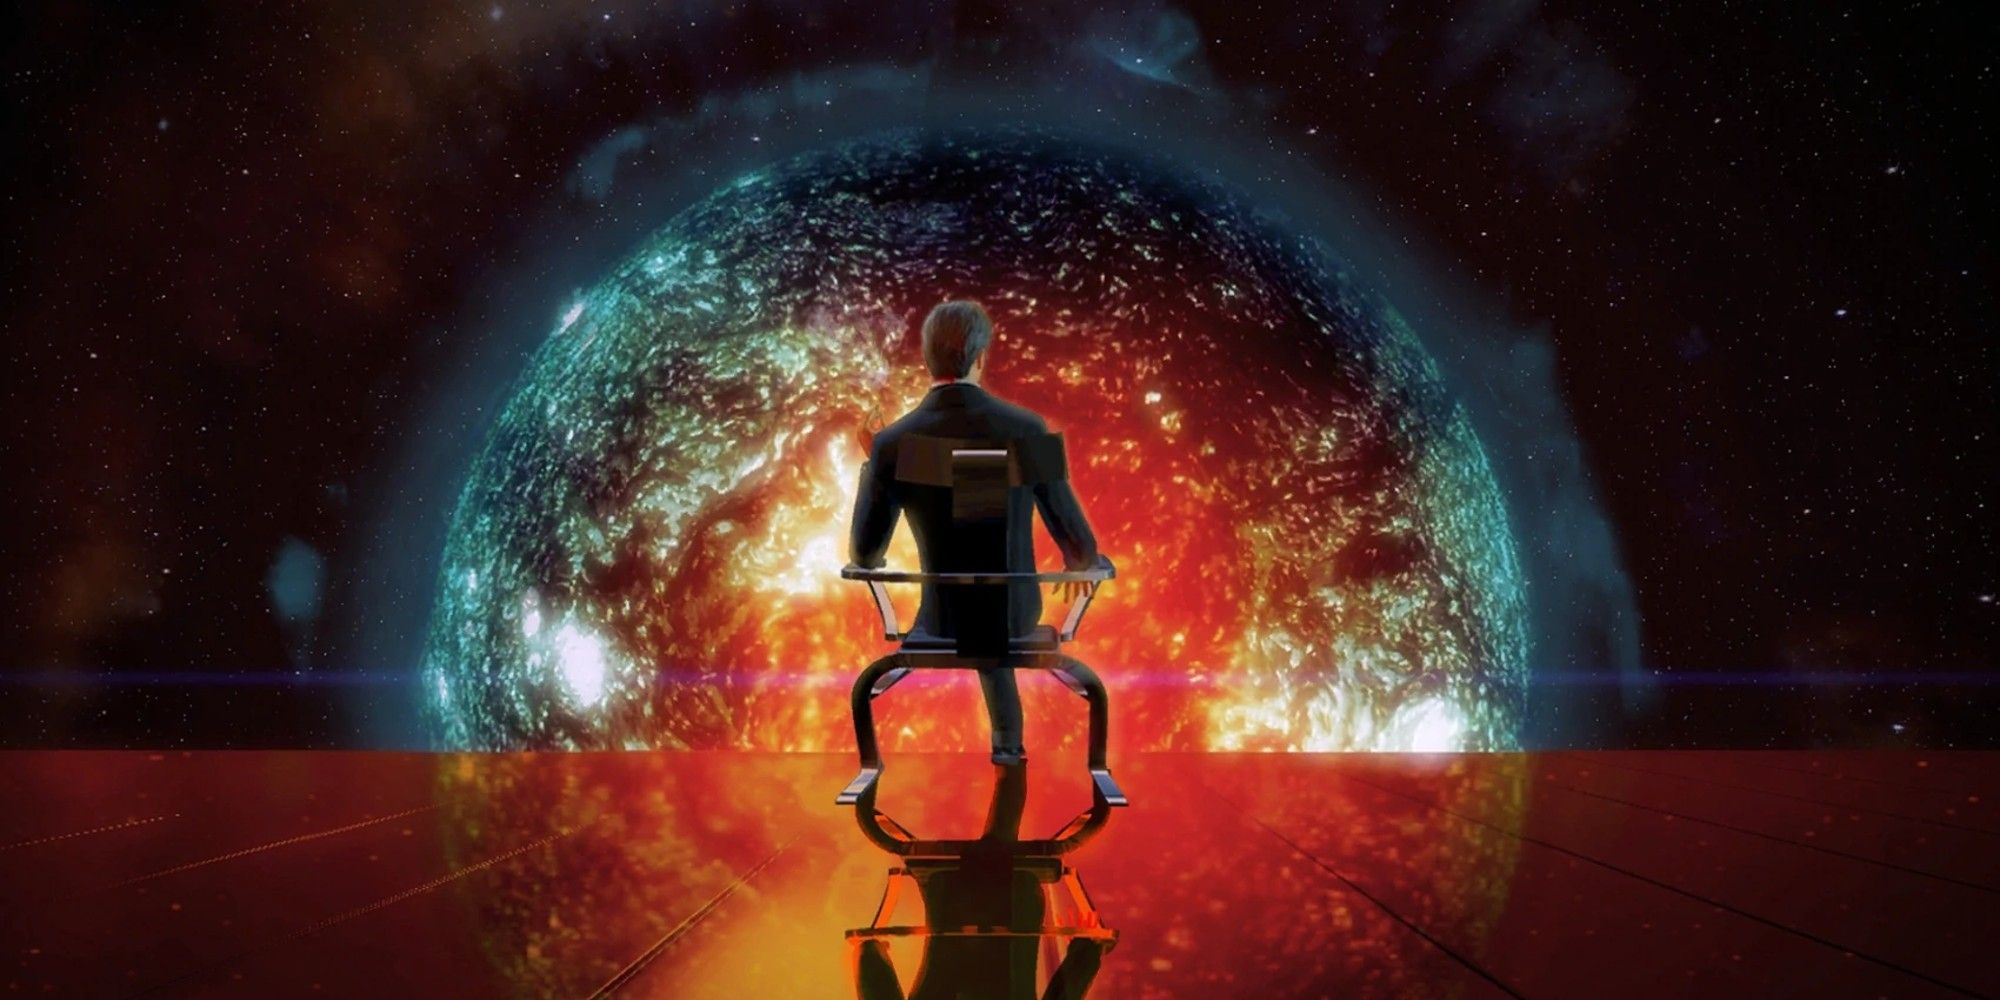 the illusive man sat down in Mass Effect